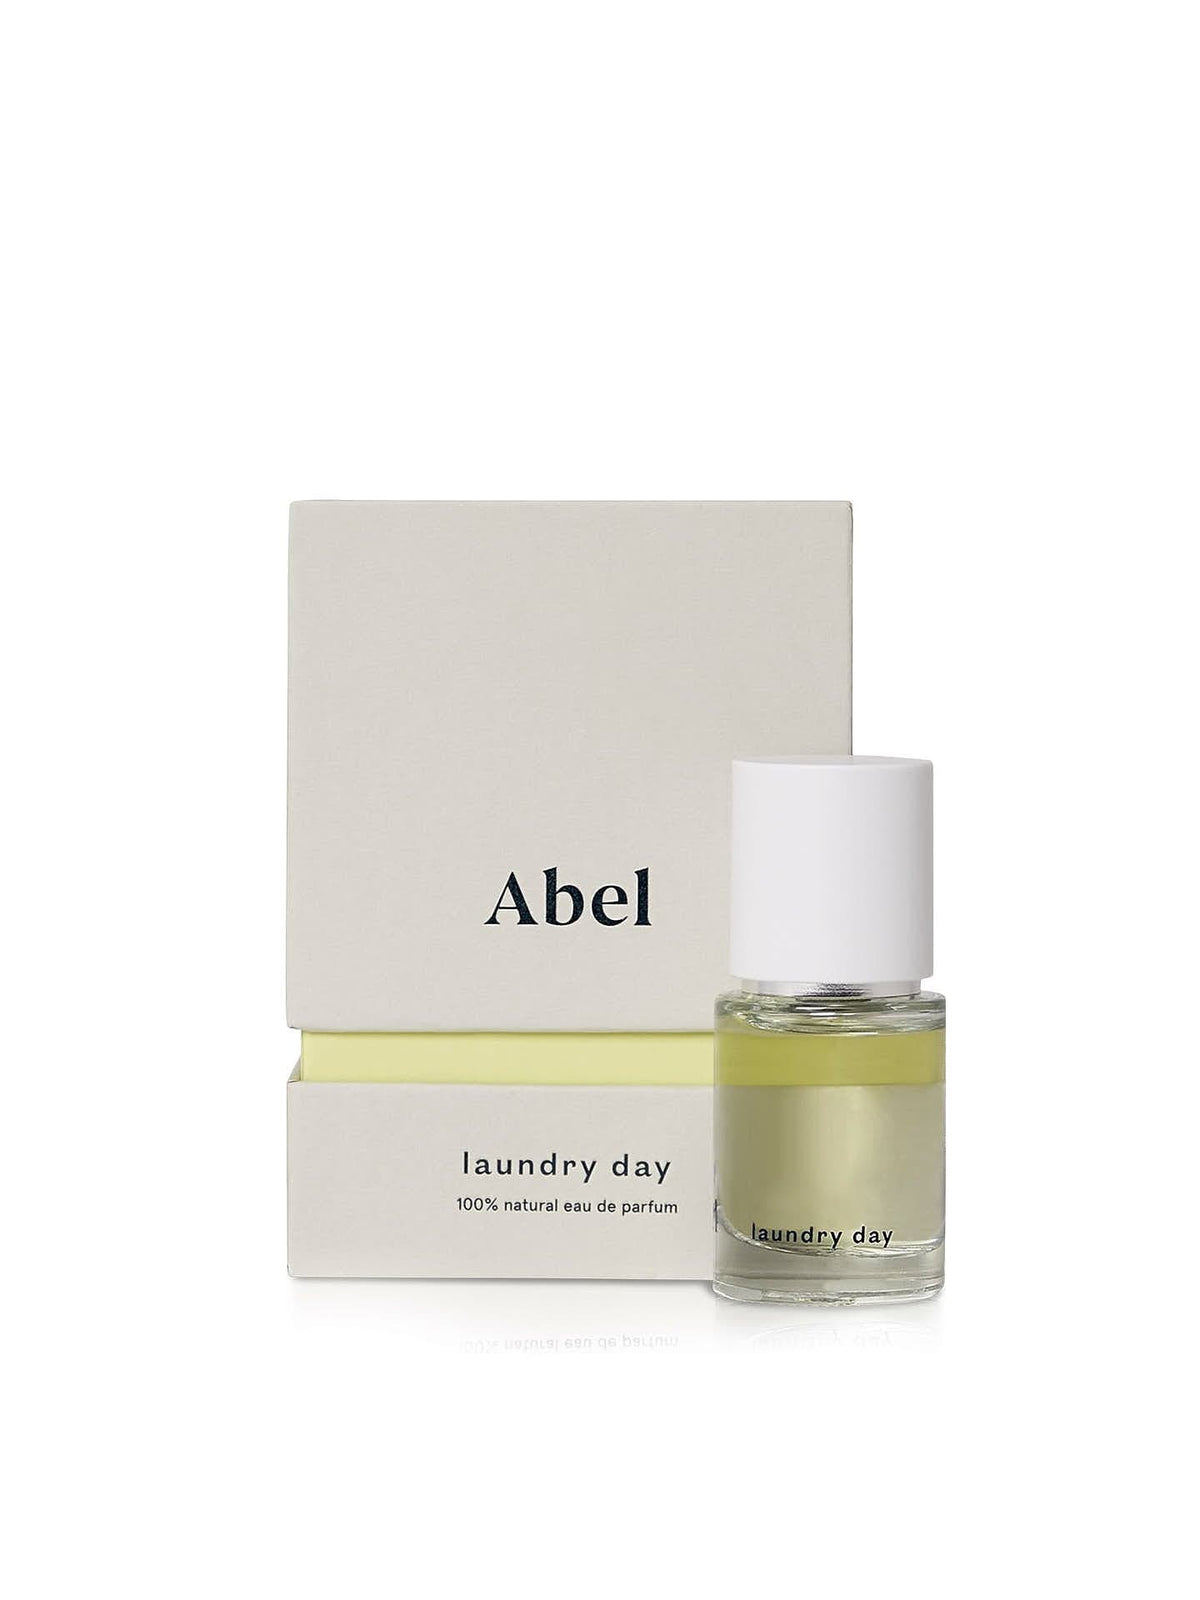 A small bottle of ethically sourced perfume labeled &quot;Laundry Day – a verdant, sun-filled citrus&quot; sits in front of a matching rectangular box labeled &quot;Abel.&quot; The liquid inside the bottle is yellow-green.